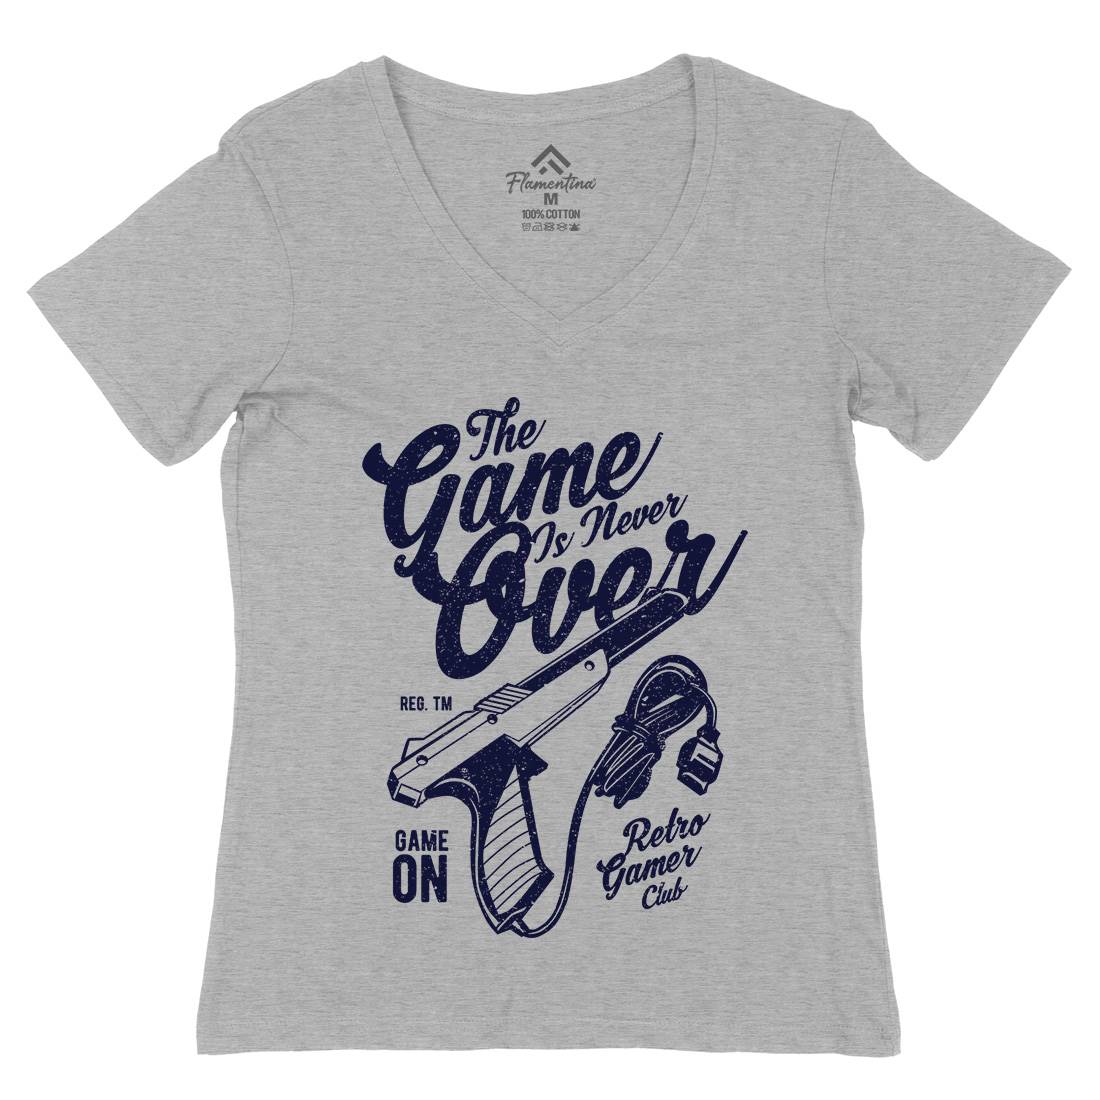 Game Is Never Over Womens Organic V-Neck T-Shirt Geek A773